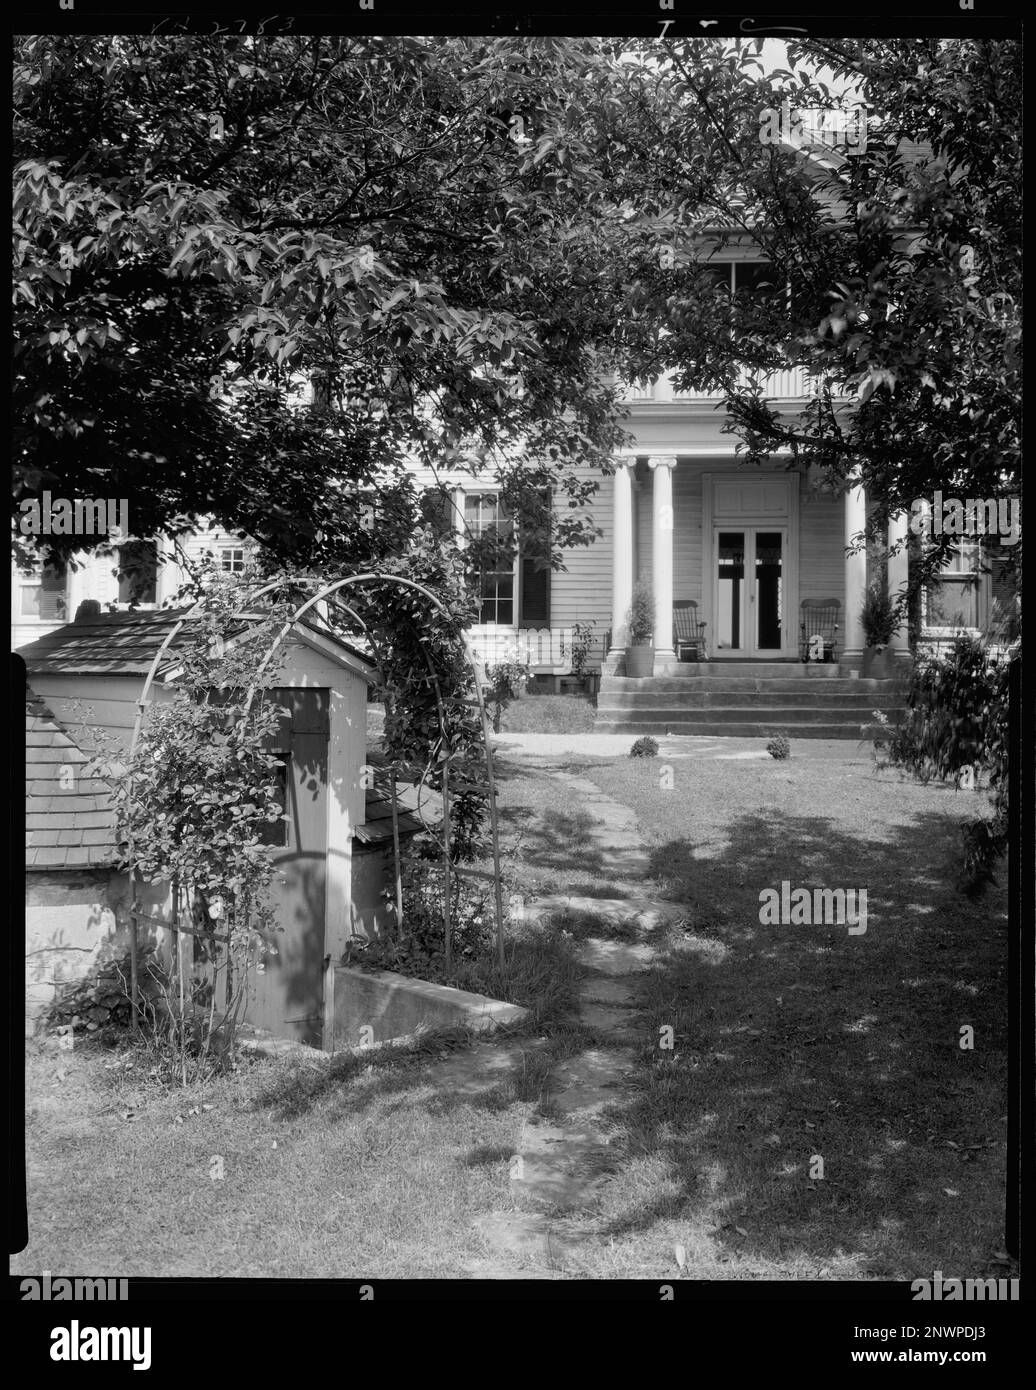 Belmont, Falmouth, Stafford County, Virginia. Carnegie Survey of the Architecture of the South. United States  Virginia  Stafford County  Falmouth, Arbors , Bowers, Outbuildings, Doors & doorways, Porches, Houses. Stock Photo